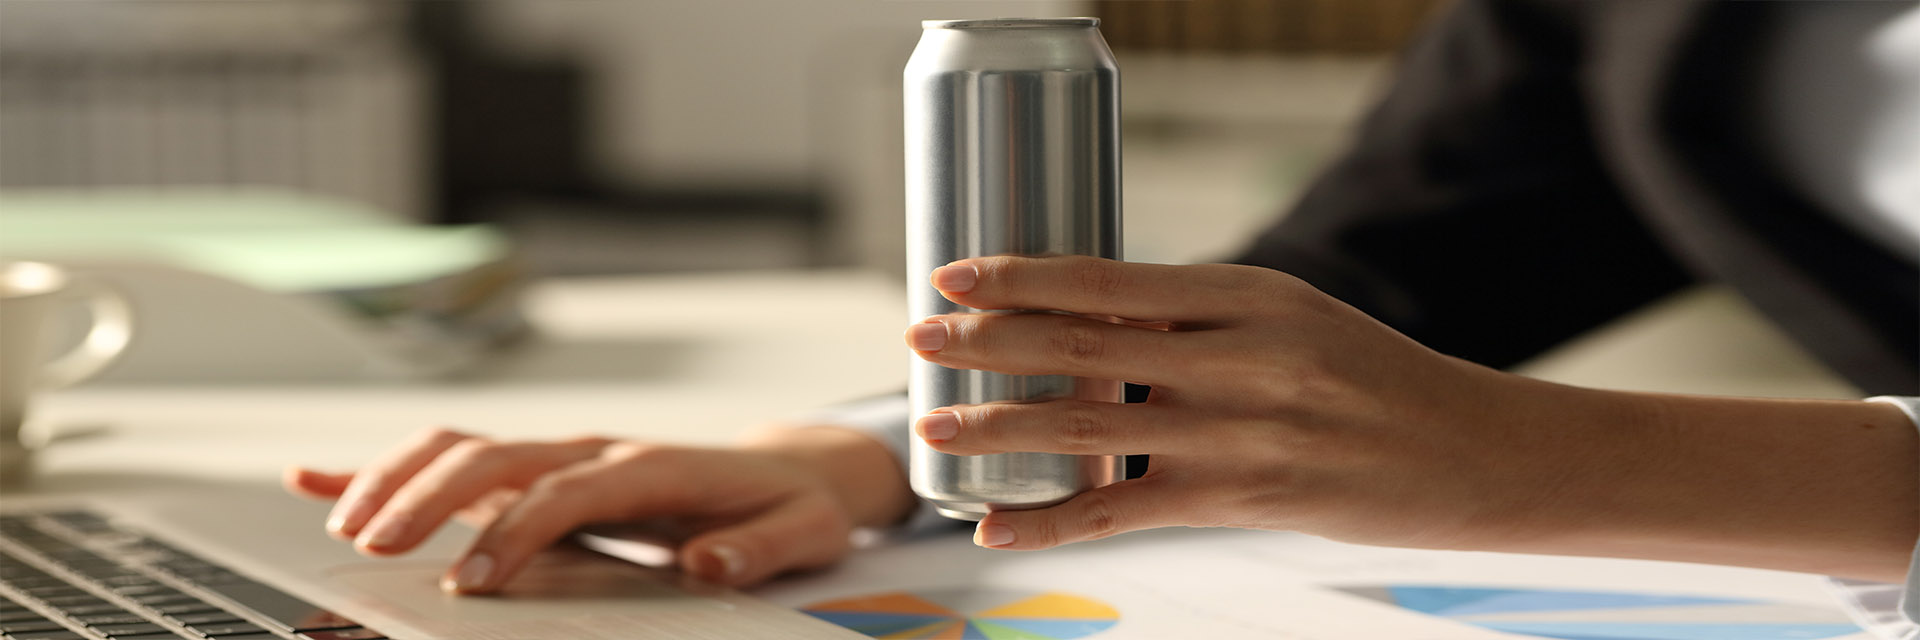 Female hand holding canned drink